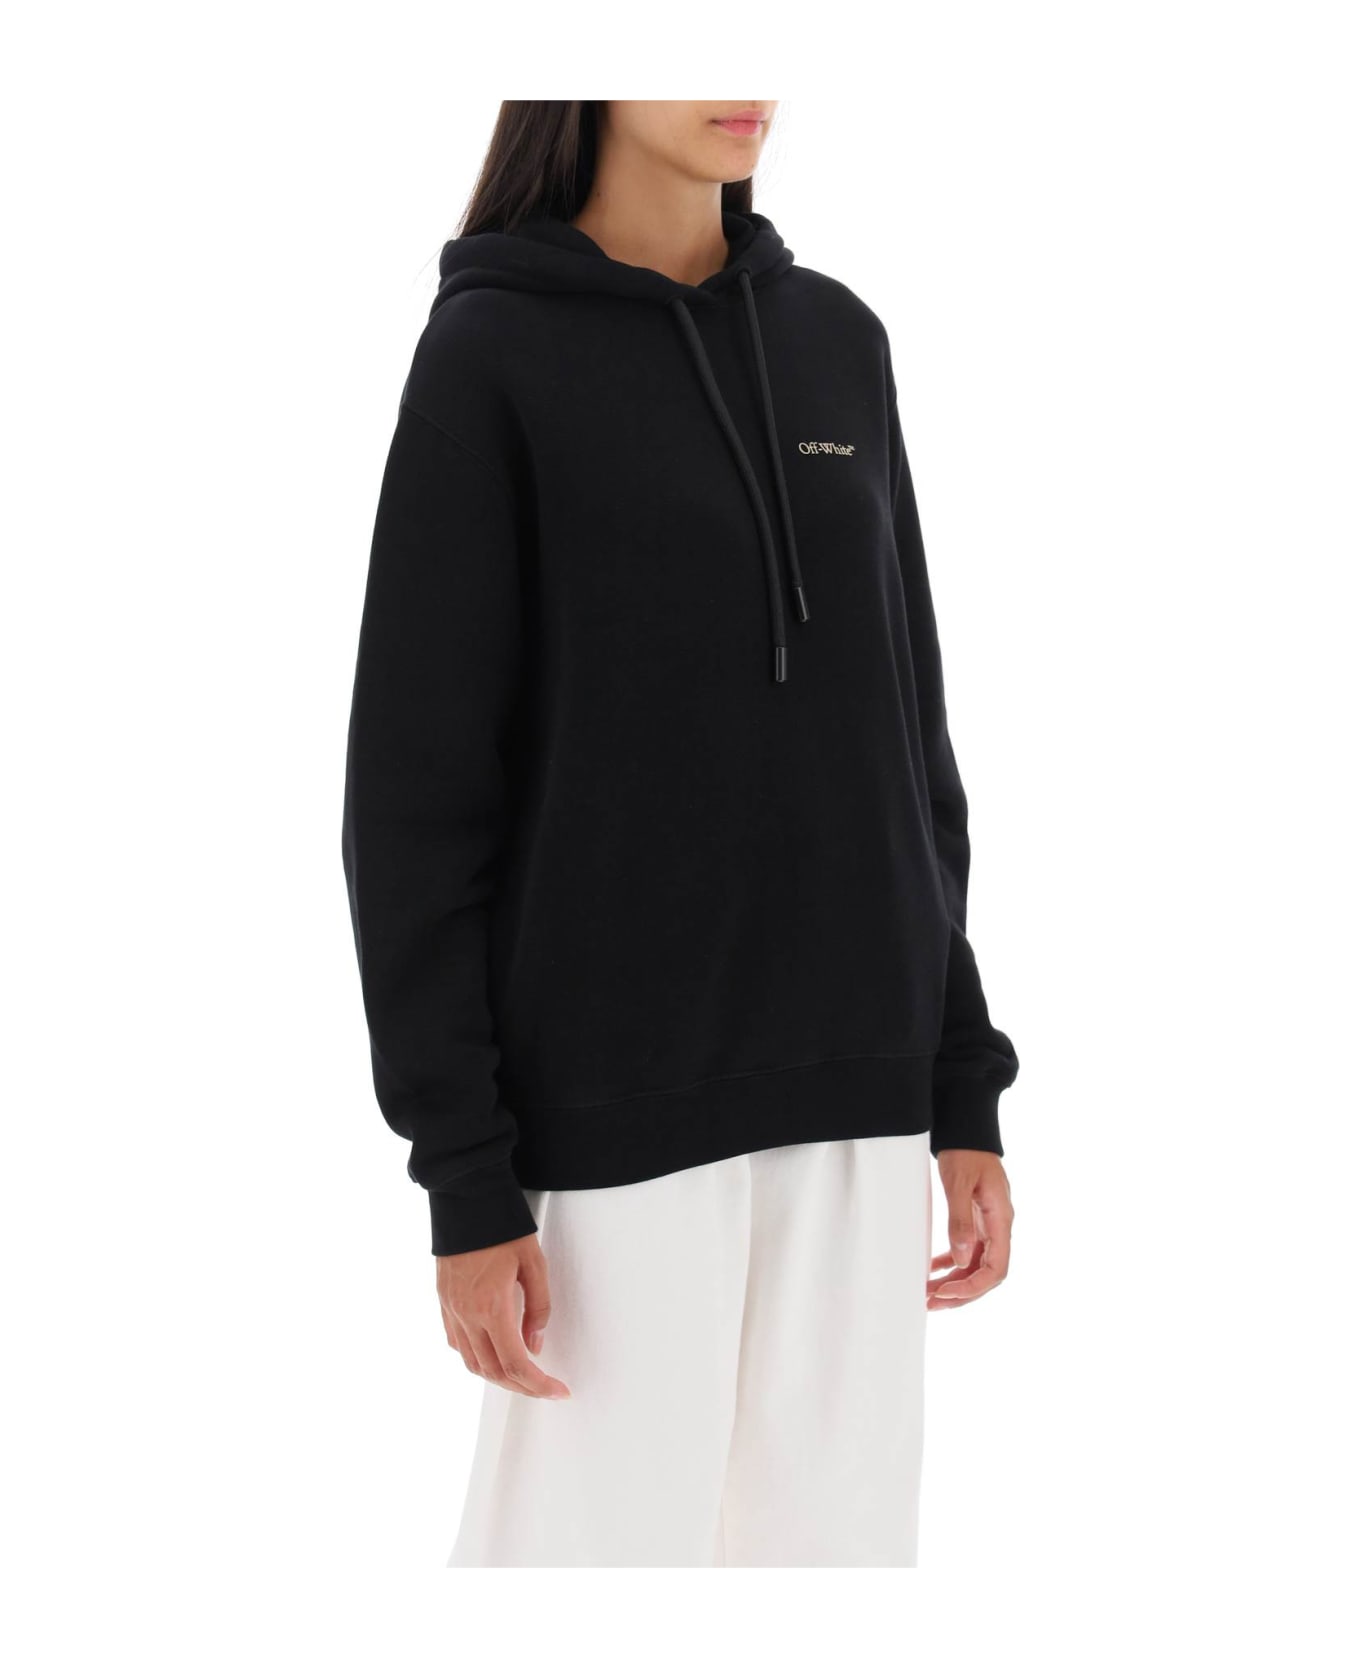 Off-White Hoodie With Back Embroidery - BLACK BEIGE (Black)